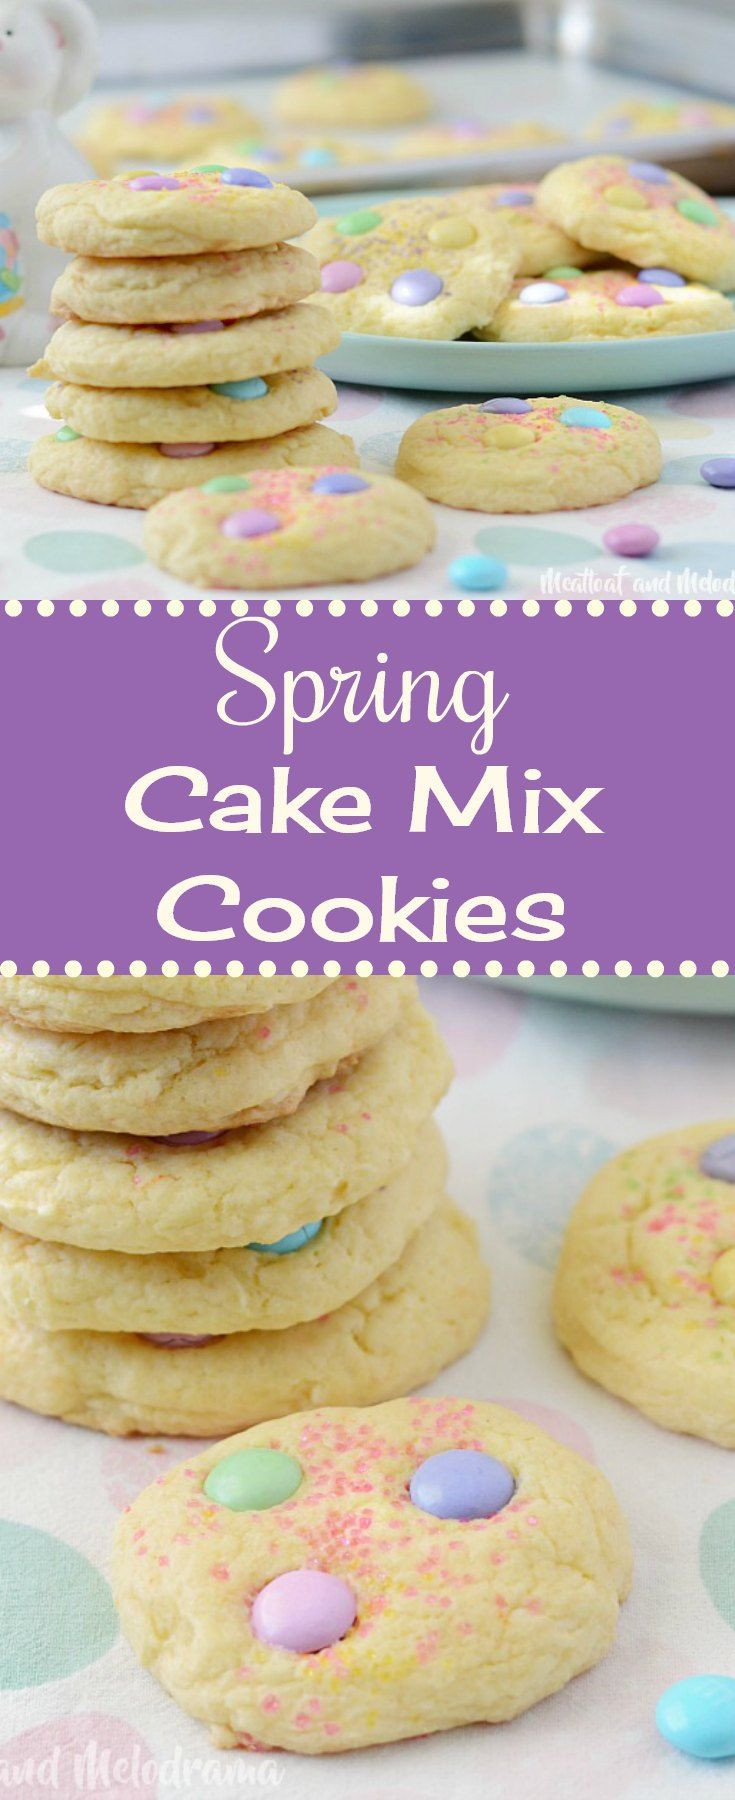 Easy Easter Desserts For Kids
 Easy Spring Cake Mix Cookies are soft chewy and made with